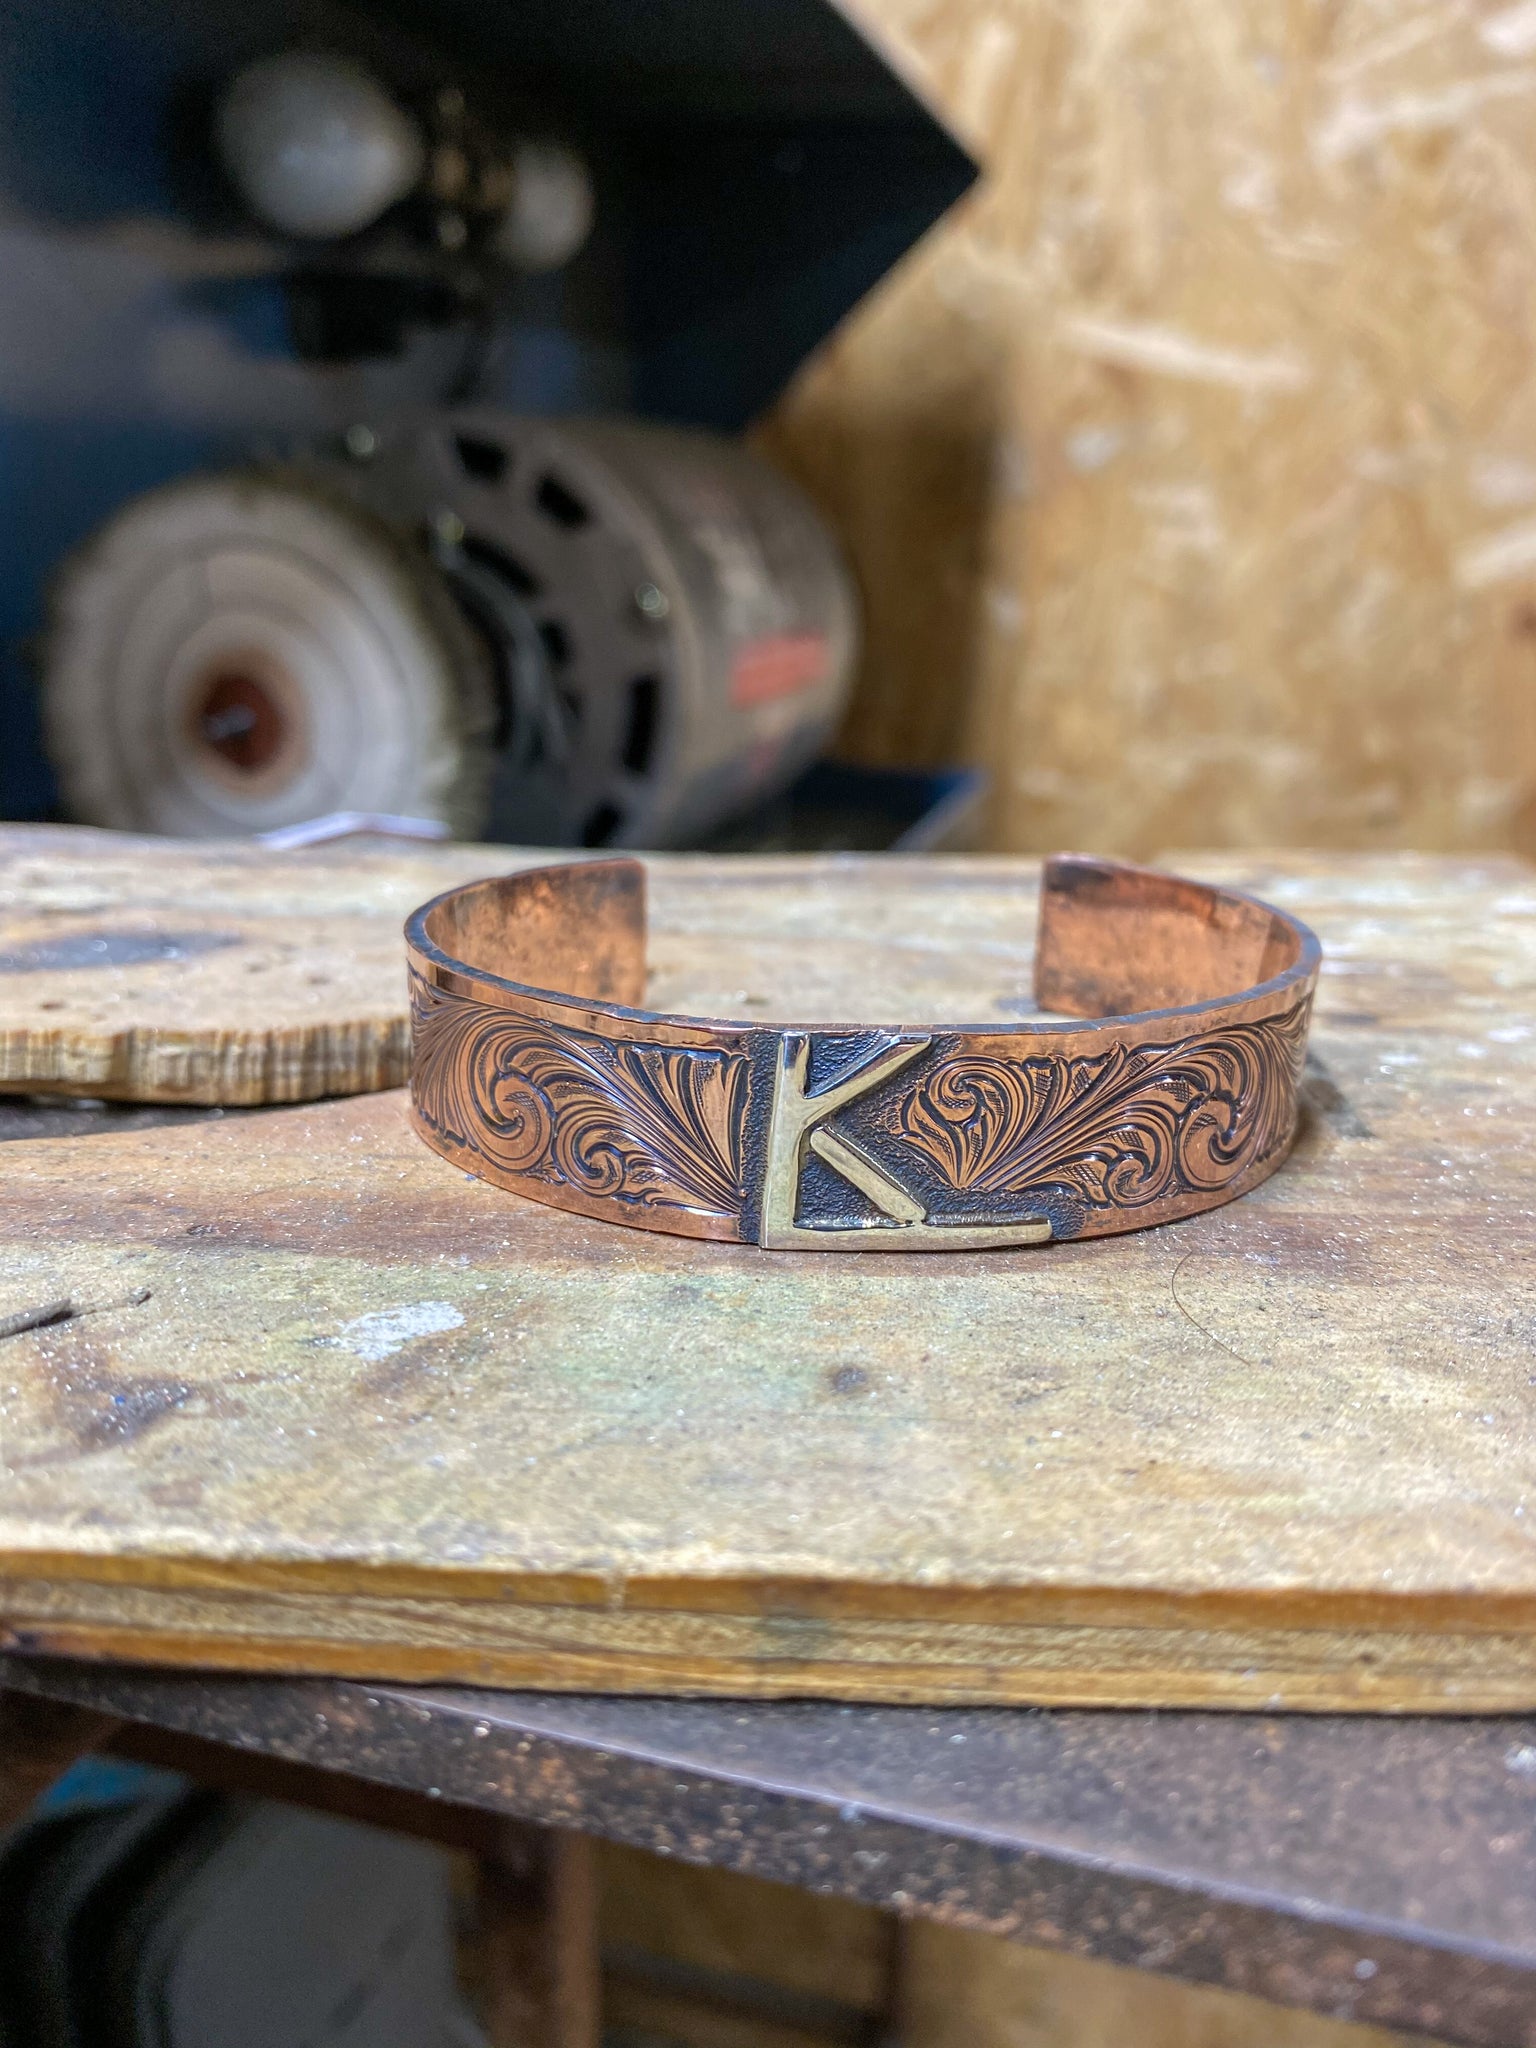 Men's Leather Bracelet with Initials